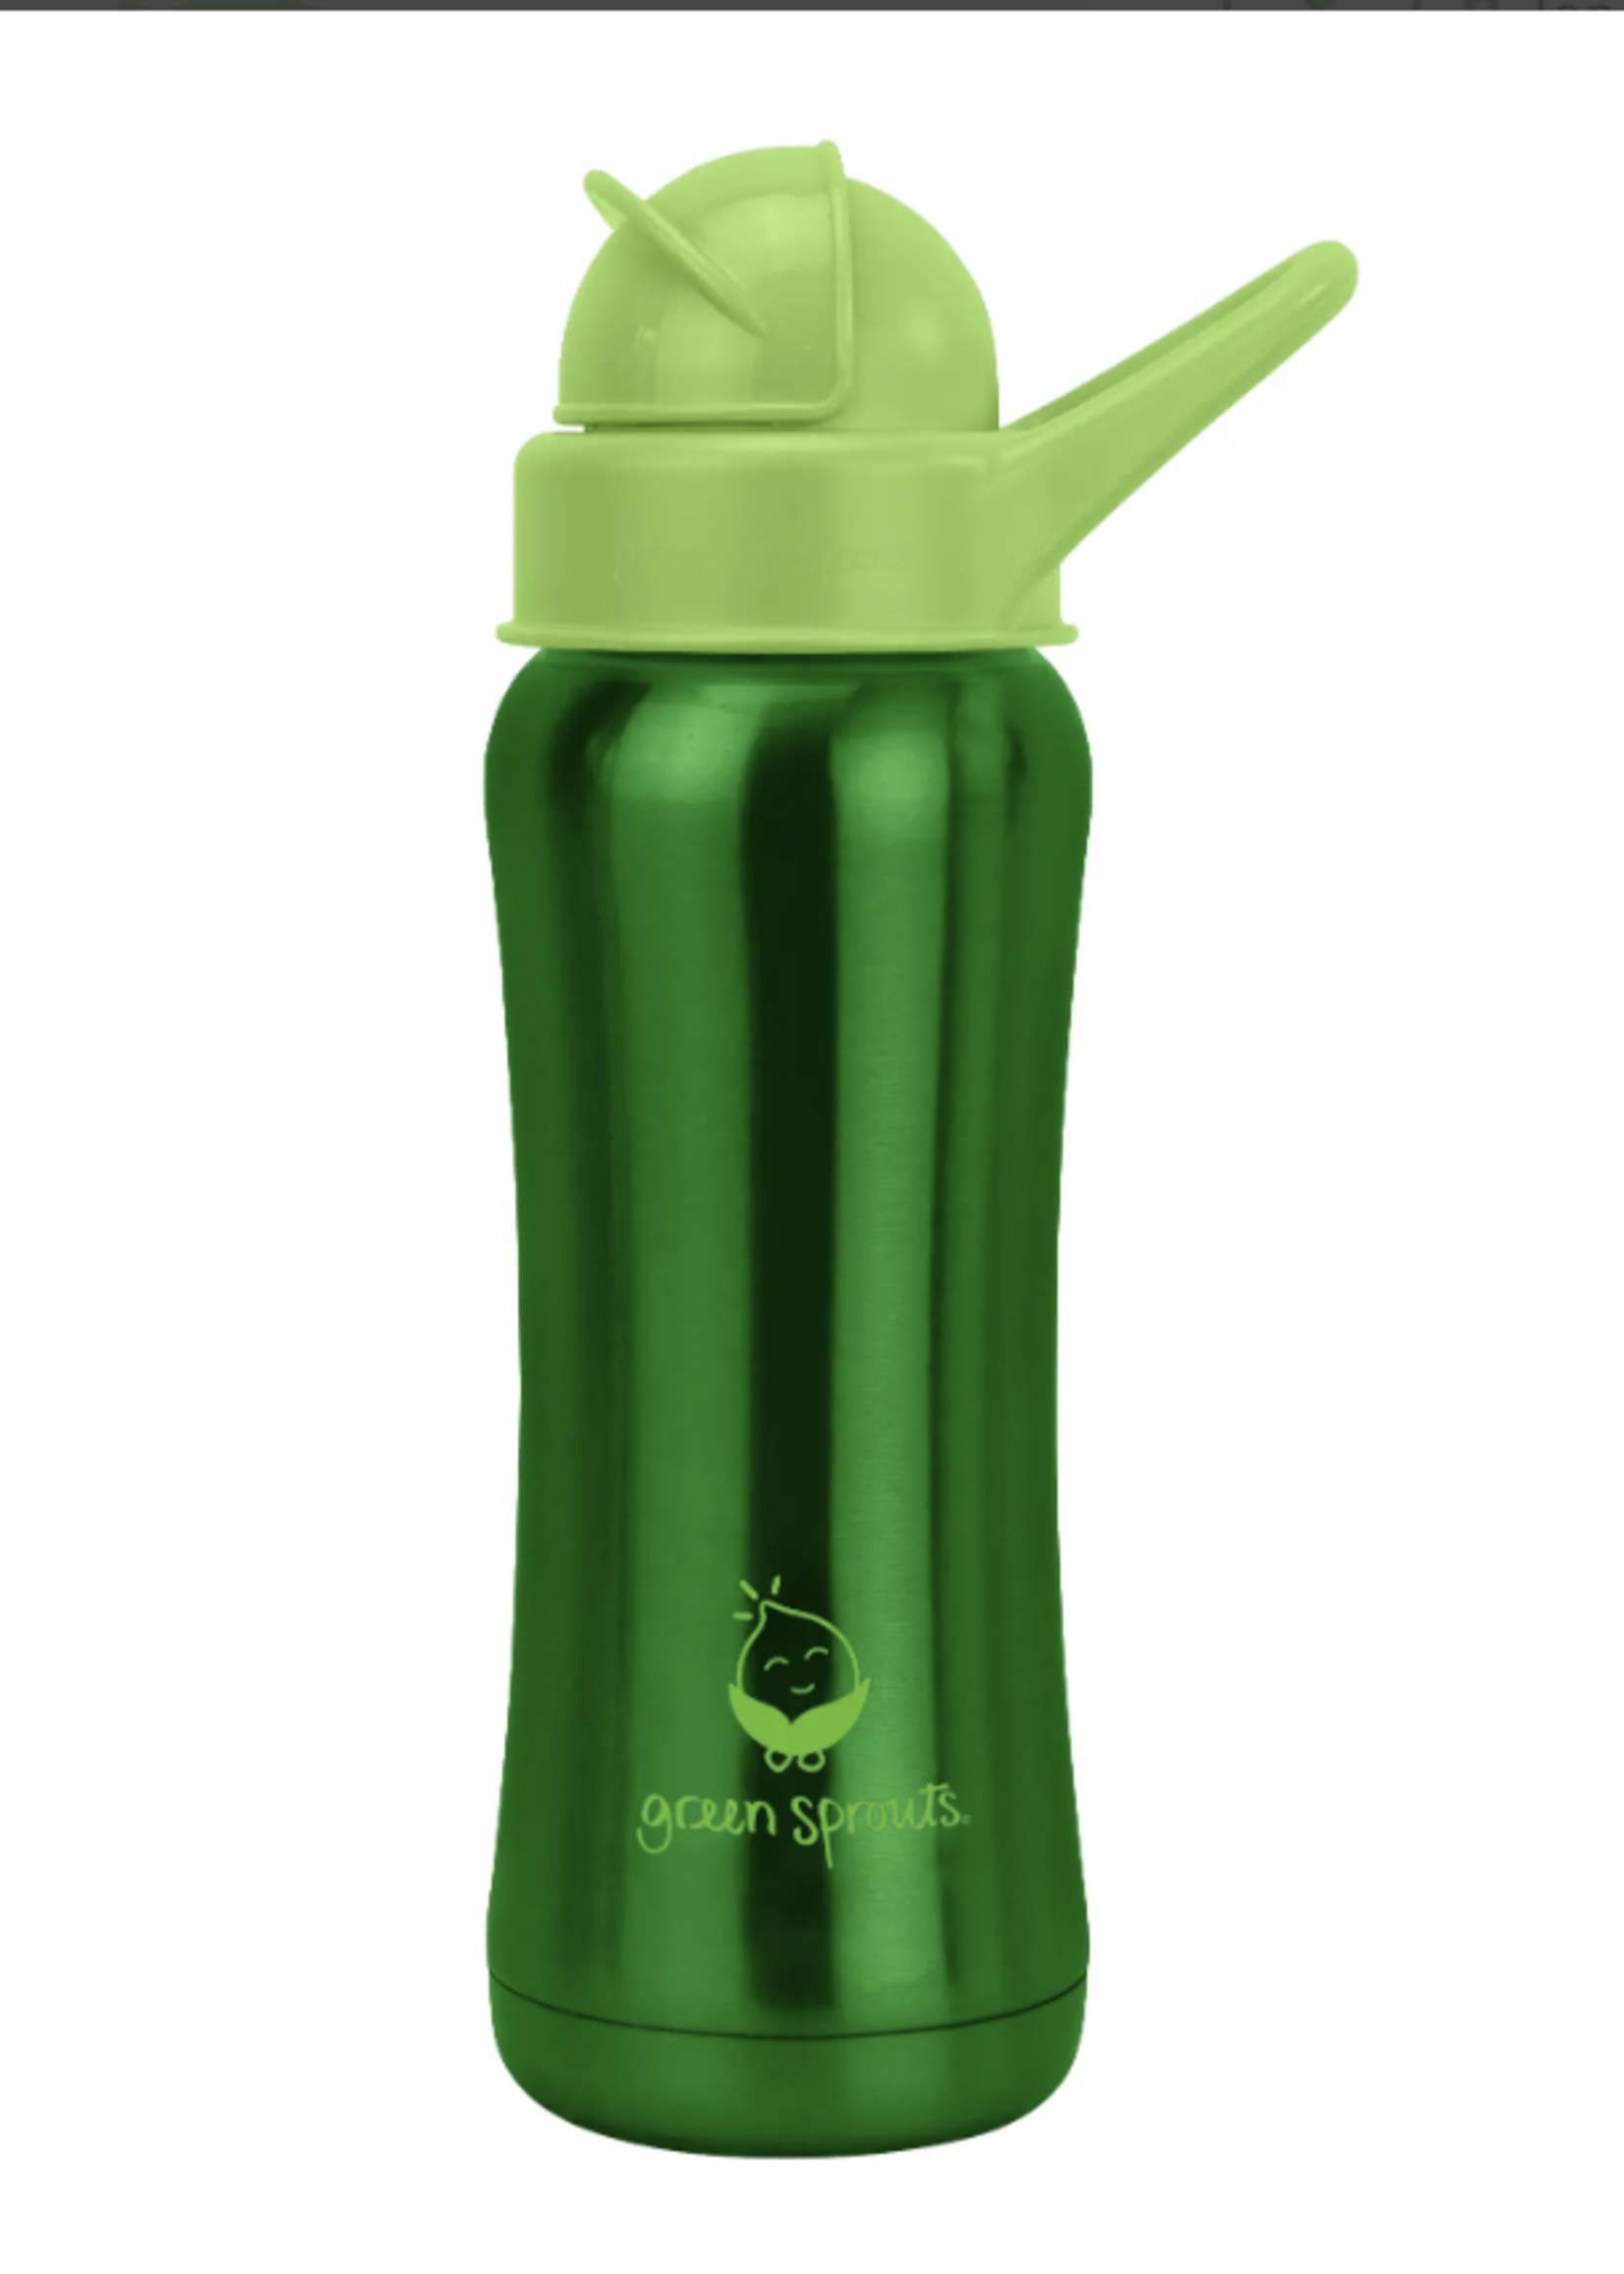 Green Sprouts, Inc Sprout Ware® Straw Bottle made from Plants & Stainless Steel